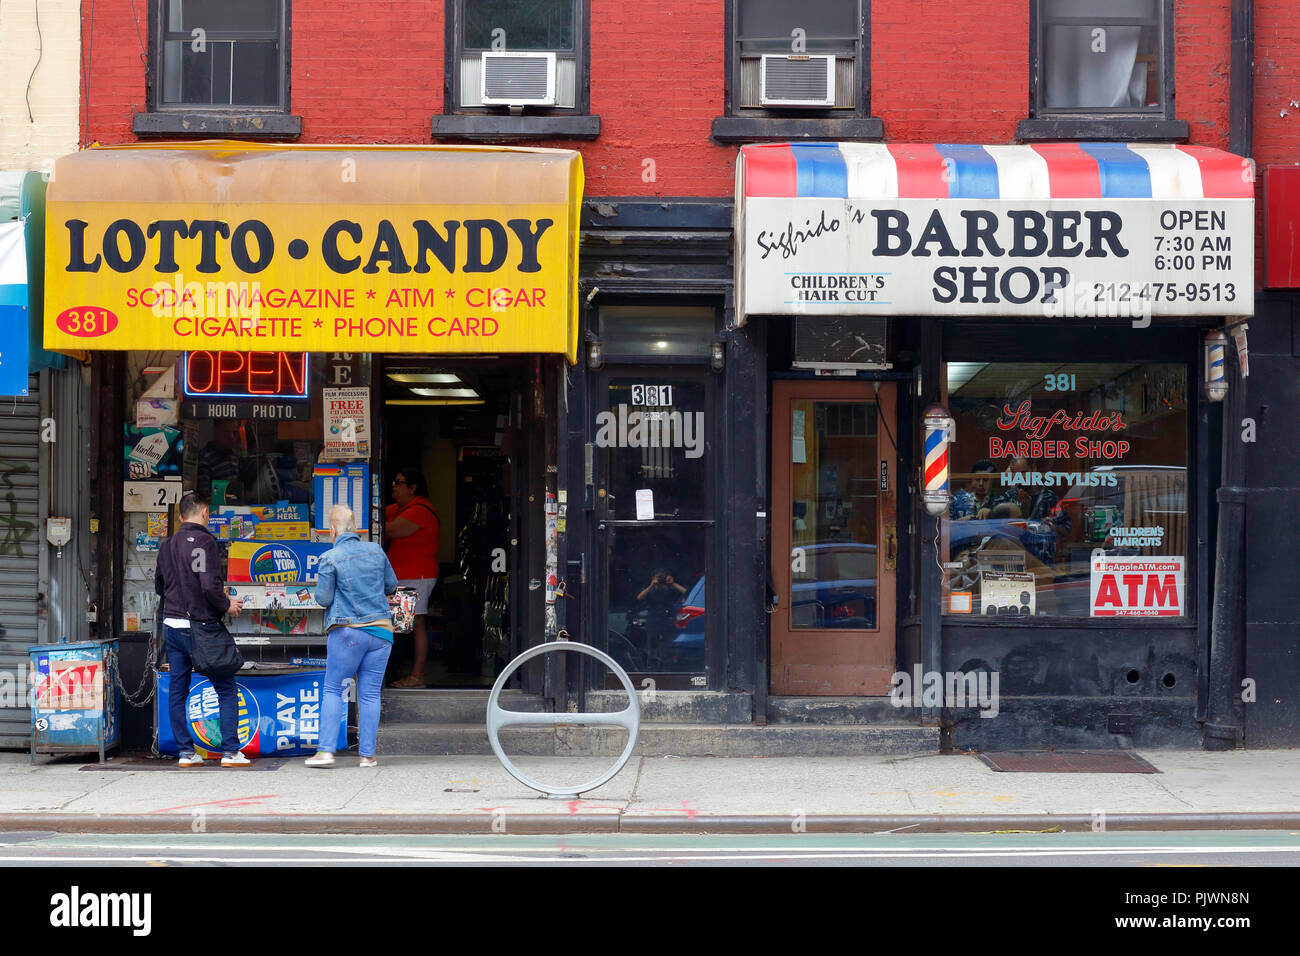 A local convenience store and barbershop  storefronts in 